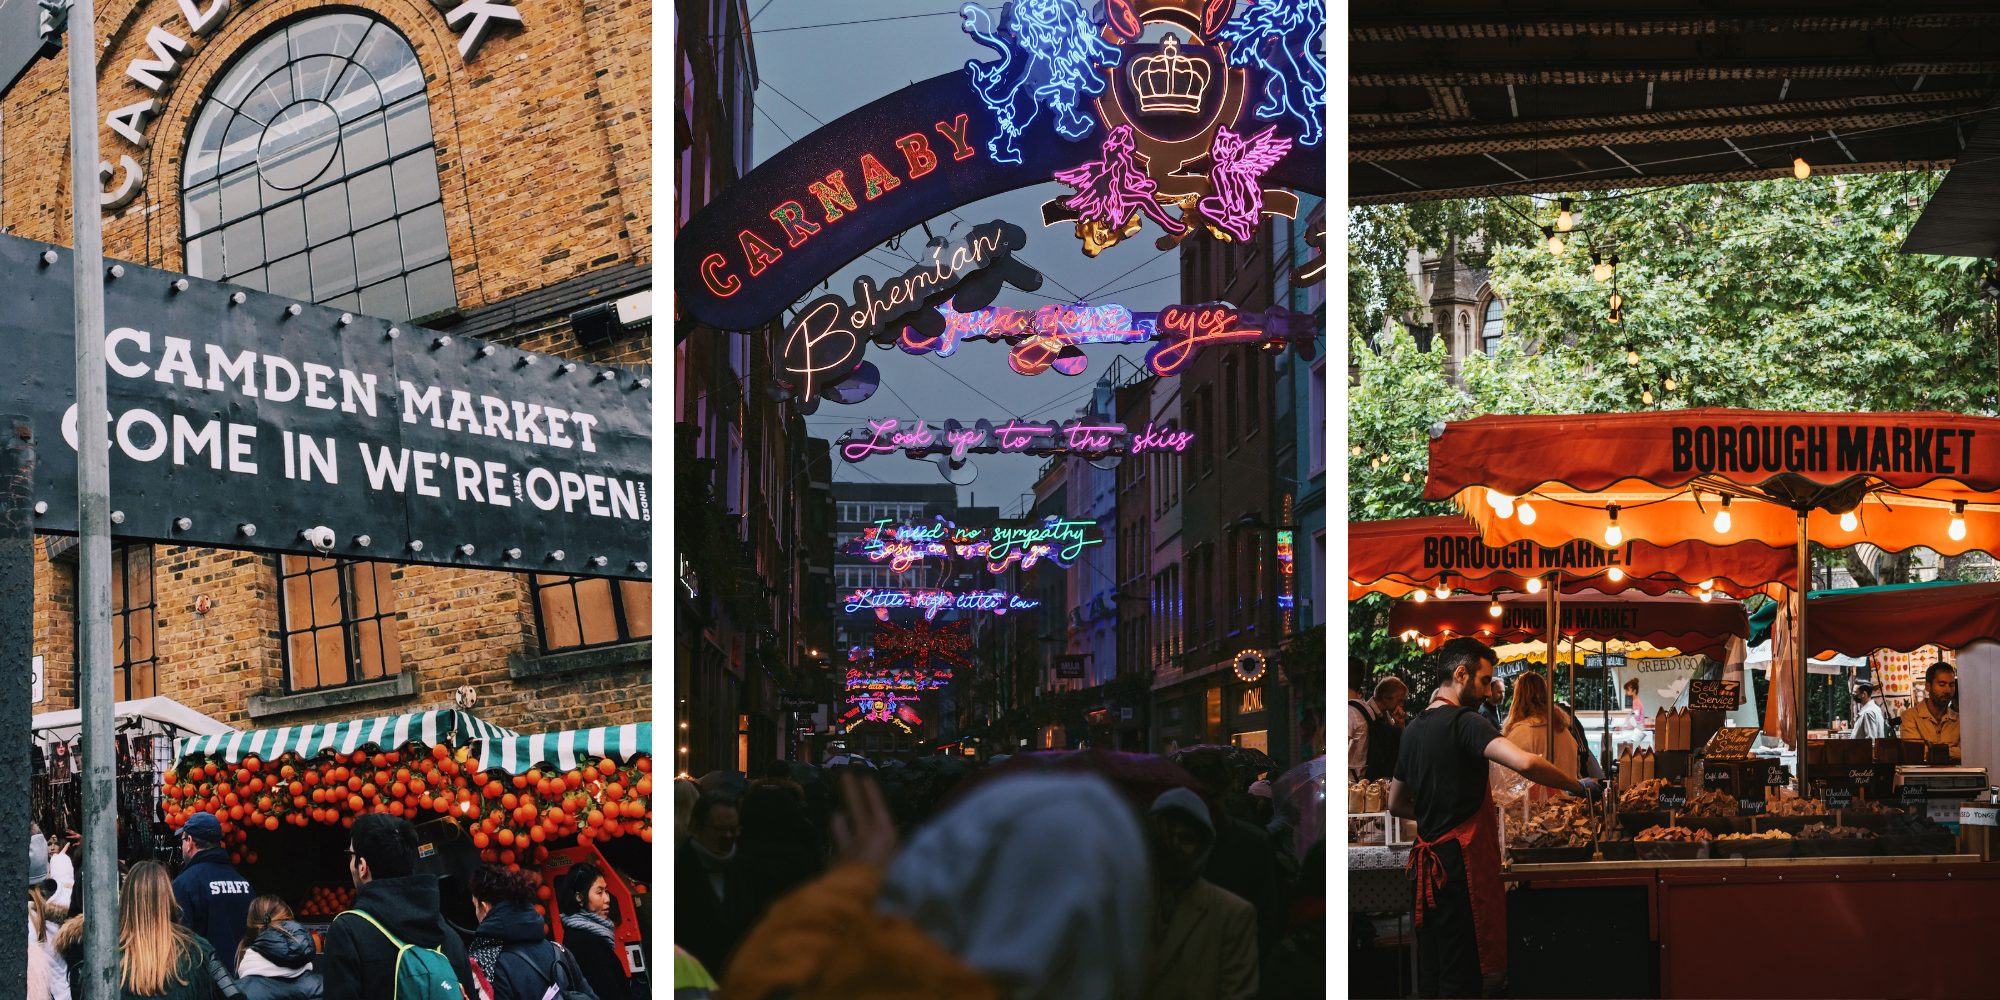 Photos of Camden Market, Borough Market, and Carnaby Street with food listed in this London travel guide for studying abroad in London.